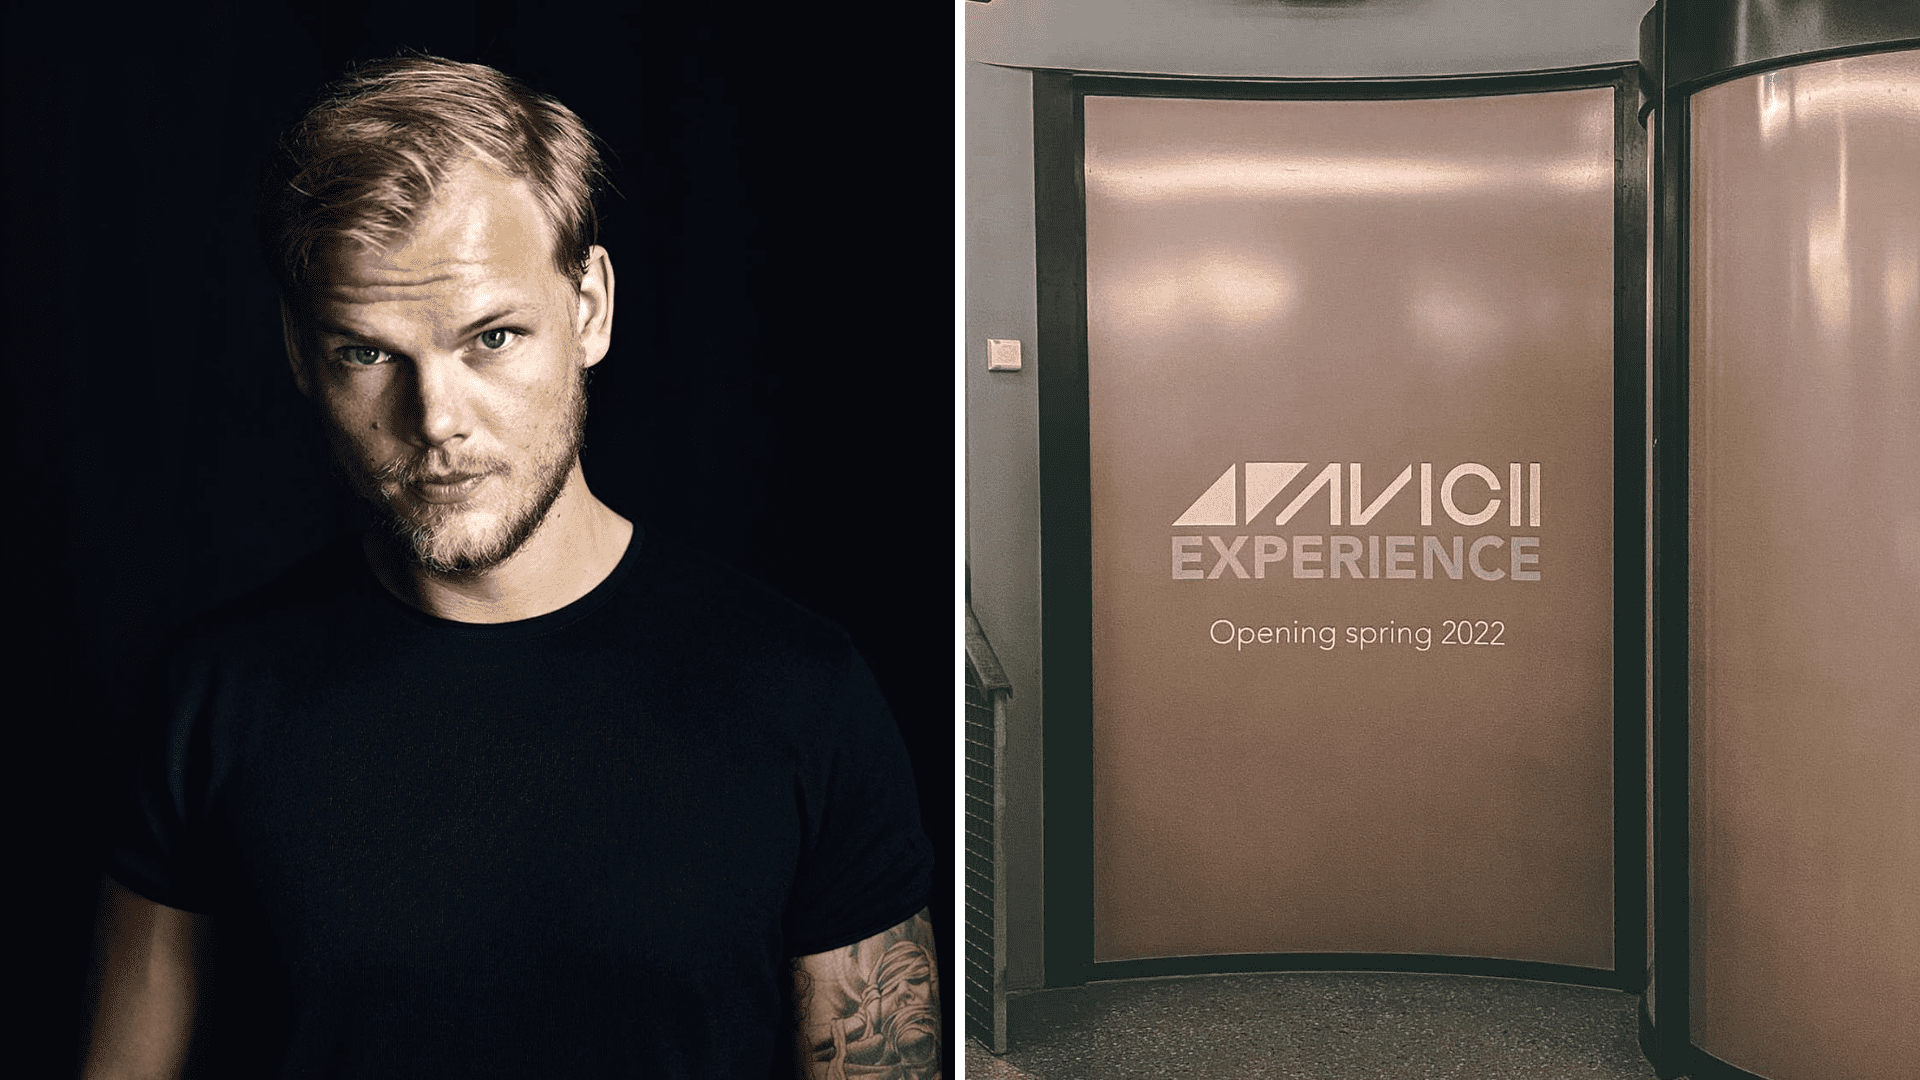 The Avicii Experience exhibition to open its doors in spring 2022, tickets to go on sale soon